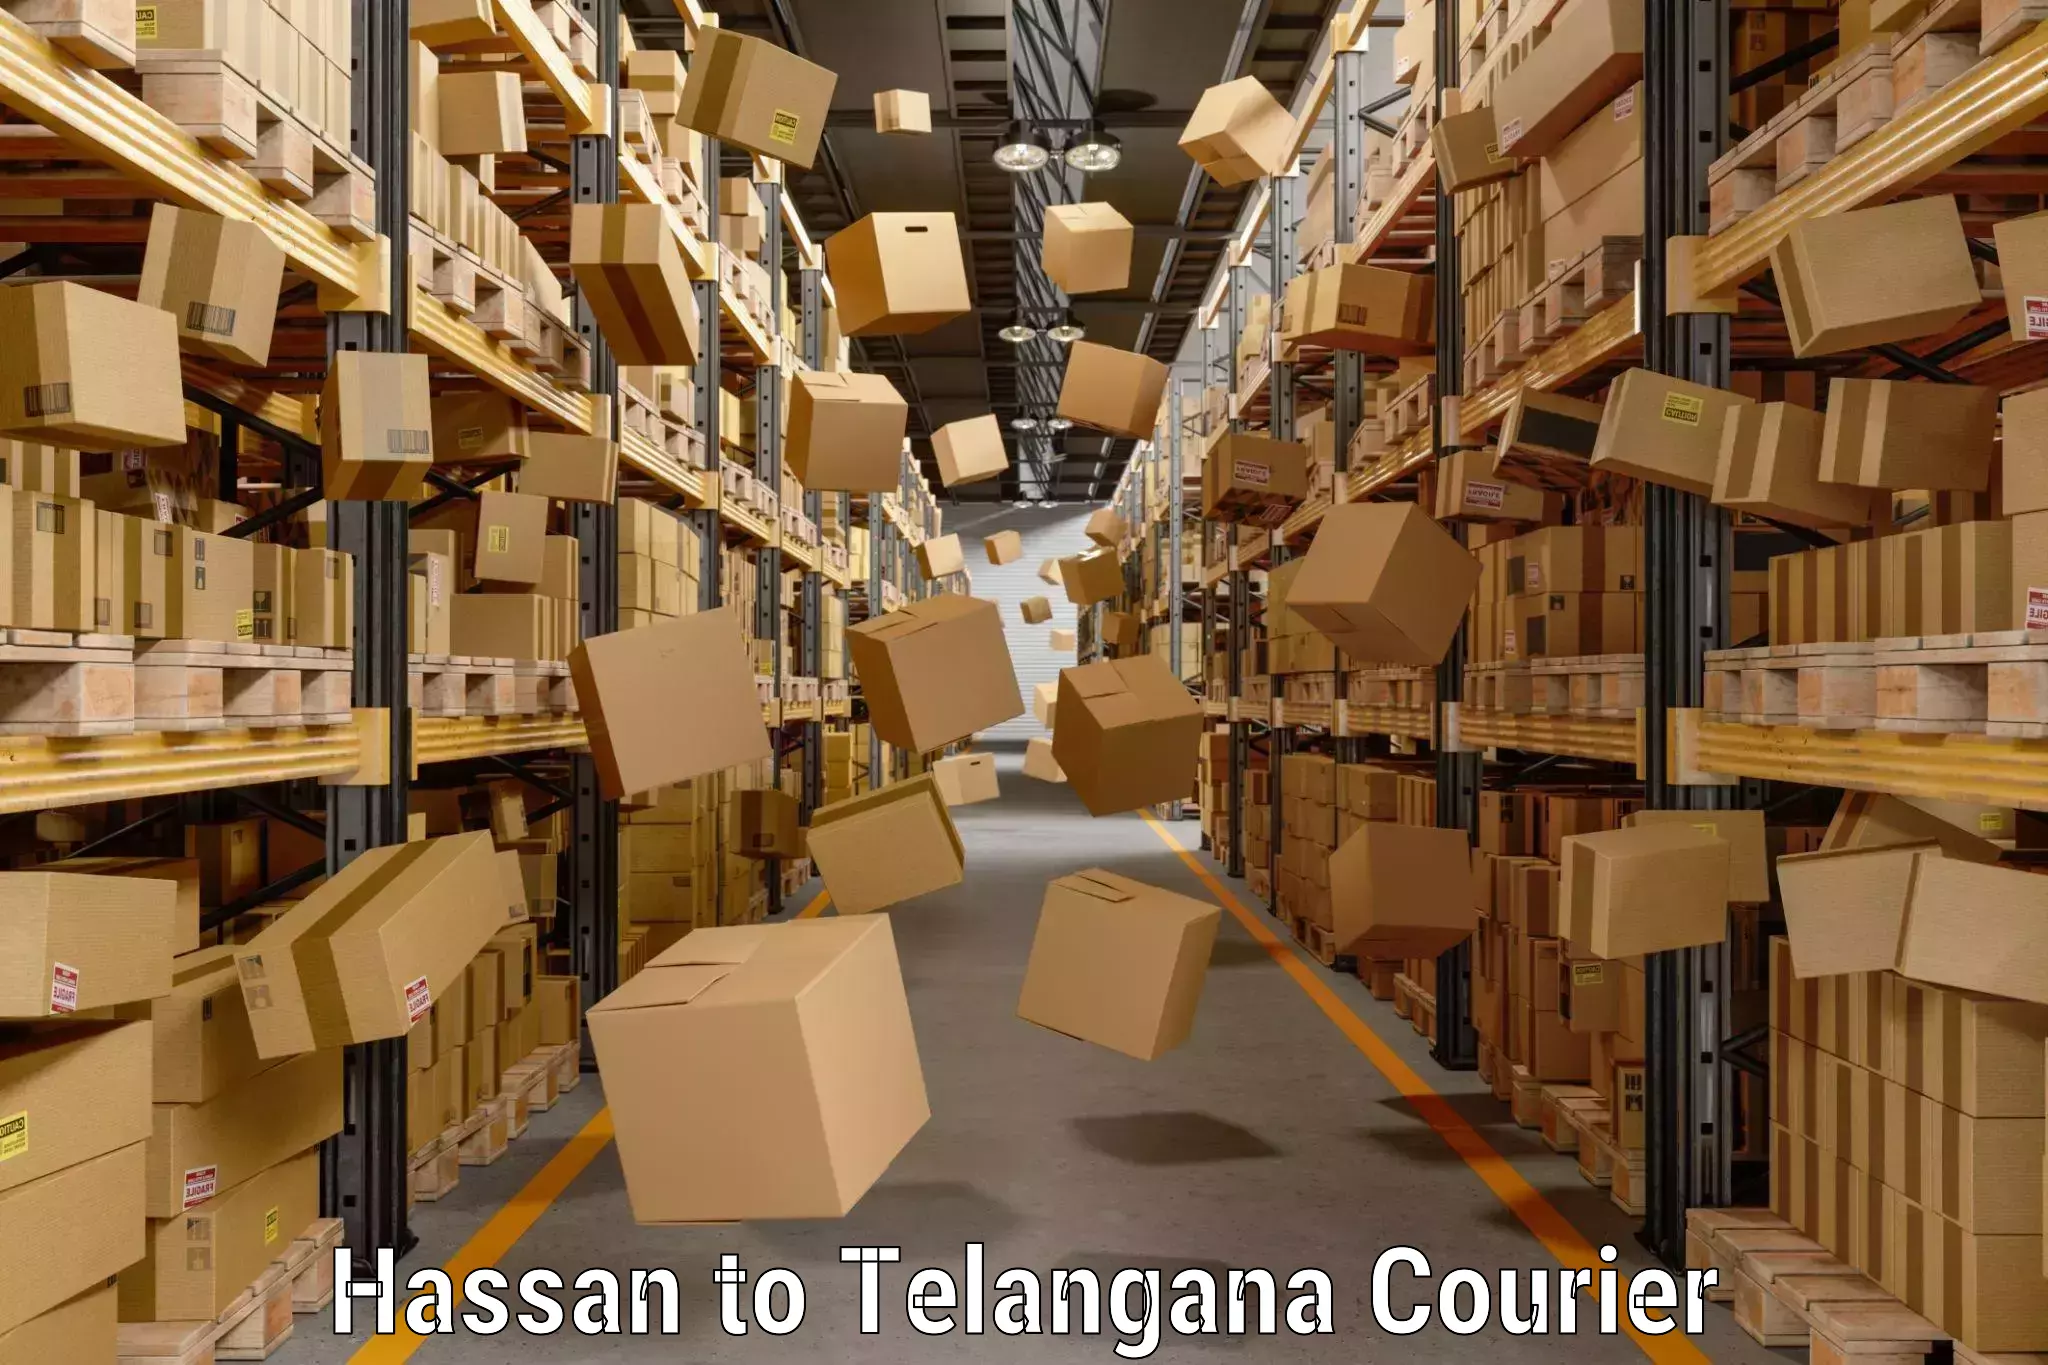 Doorstep luggage collection in Hassan to Telangana